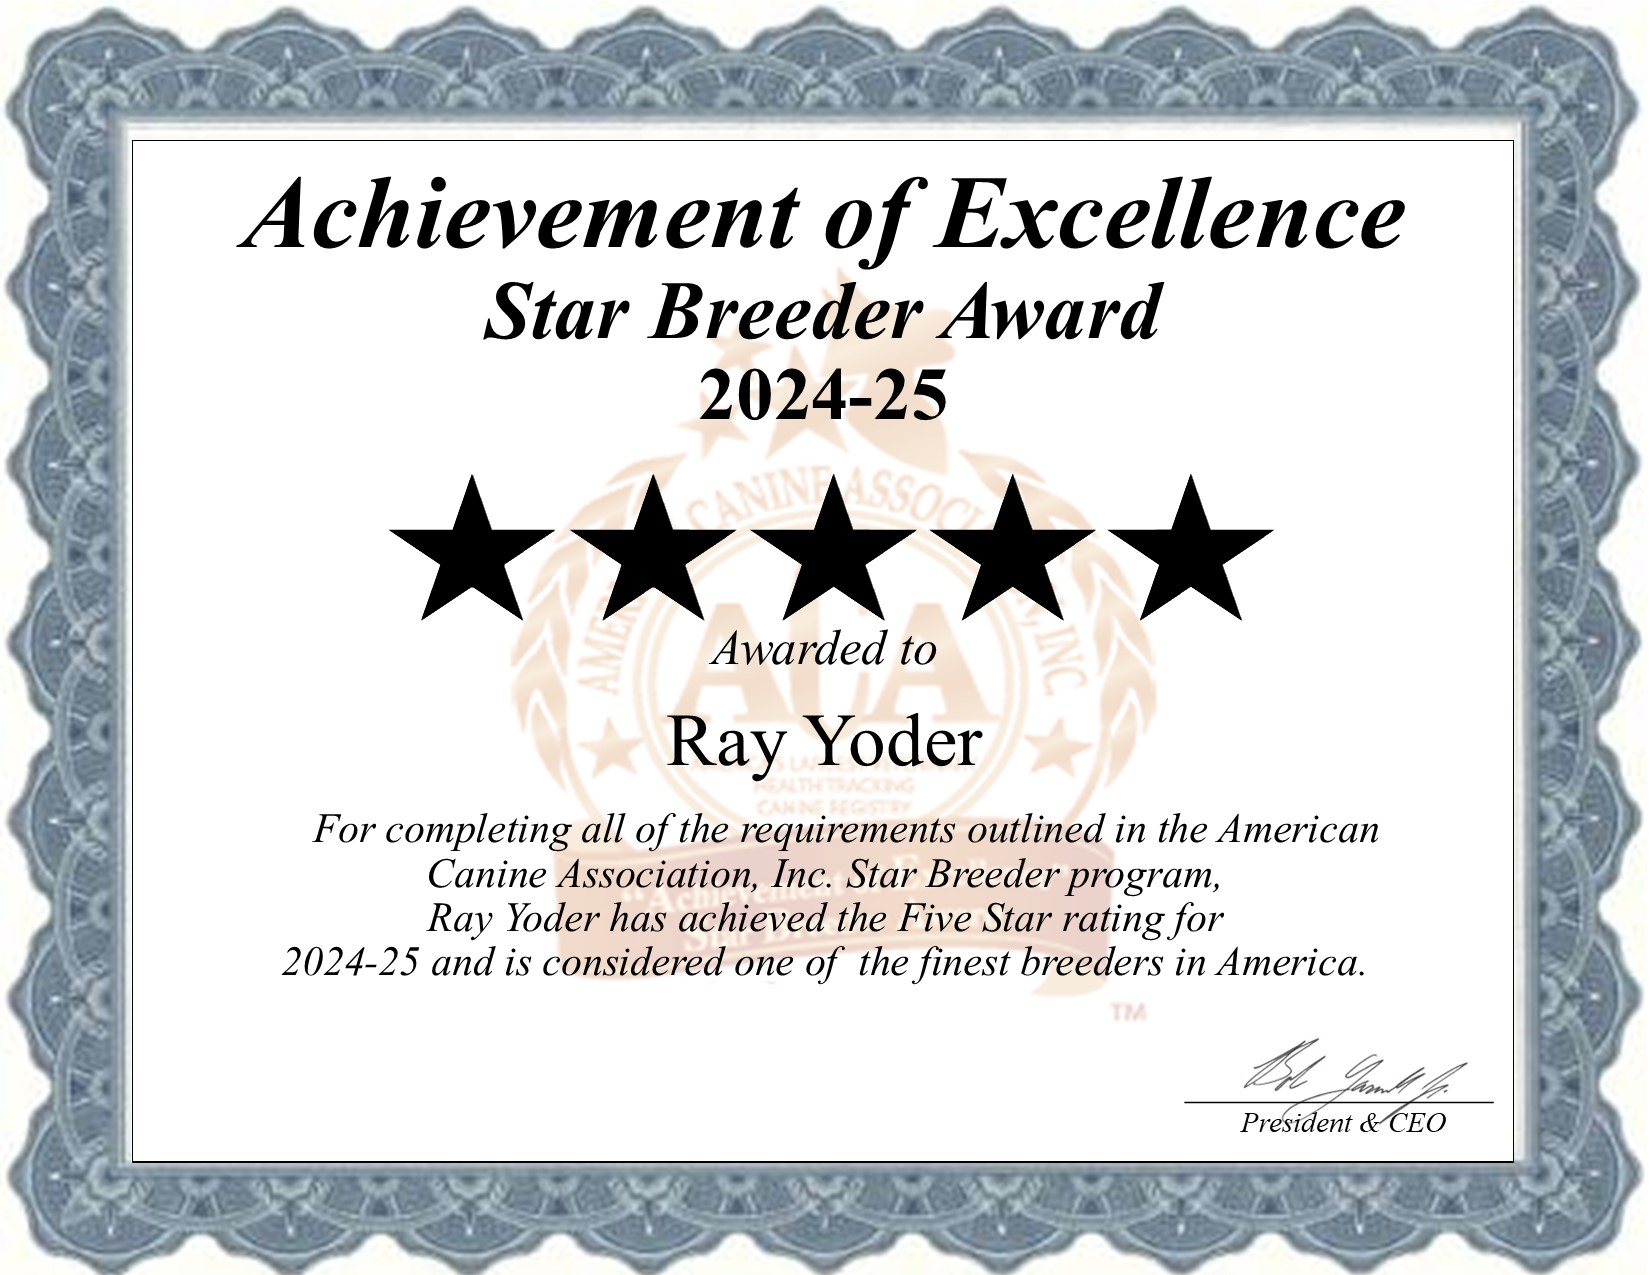 Ray, Yoder, dog, breeder, star, certificate, Ray-Yoder, Oblong, IL, Illinois, puppy, dog, kennels, mill, puppymill, usda, 5-star, aca, ica, registered, Boston Terrier